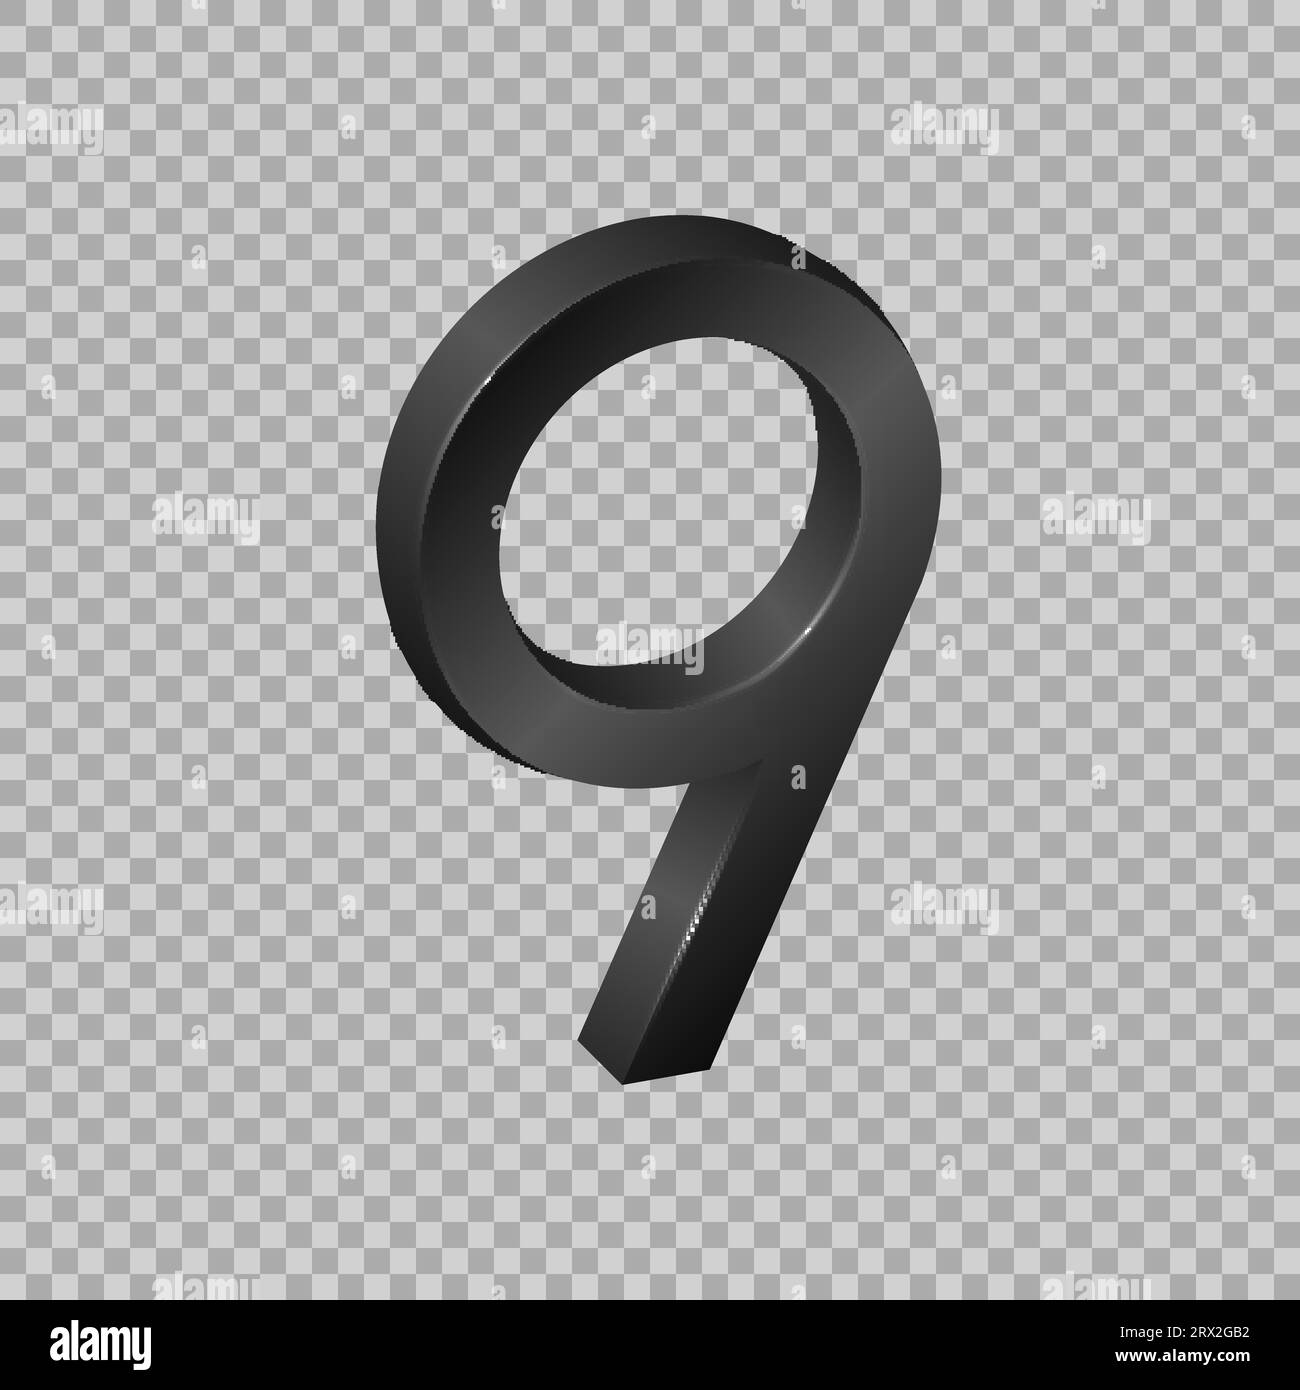 Number nine, ninth, isometric mathematical figure, symbol font in 3d on ...